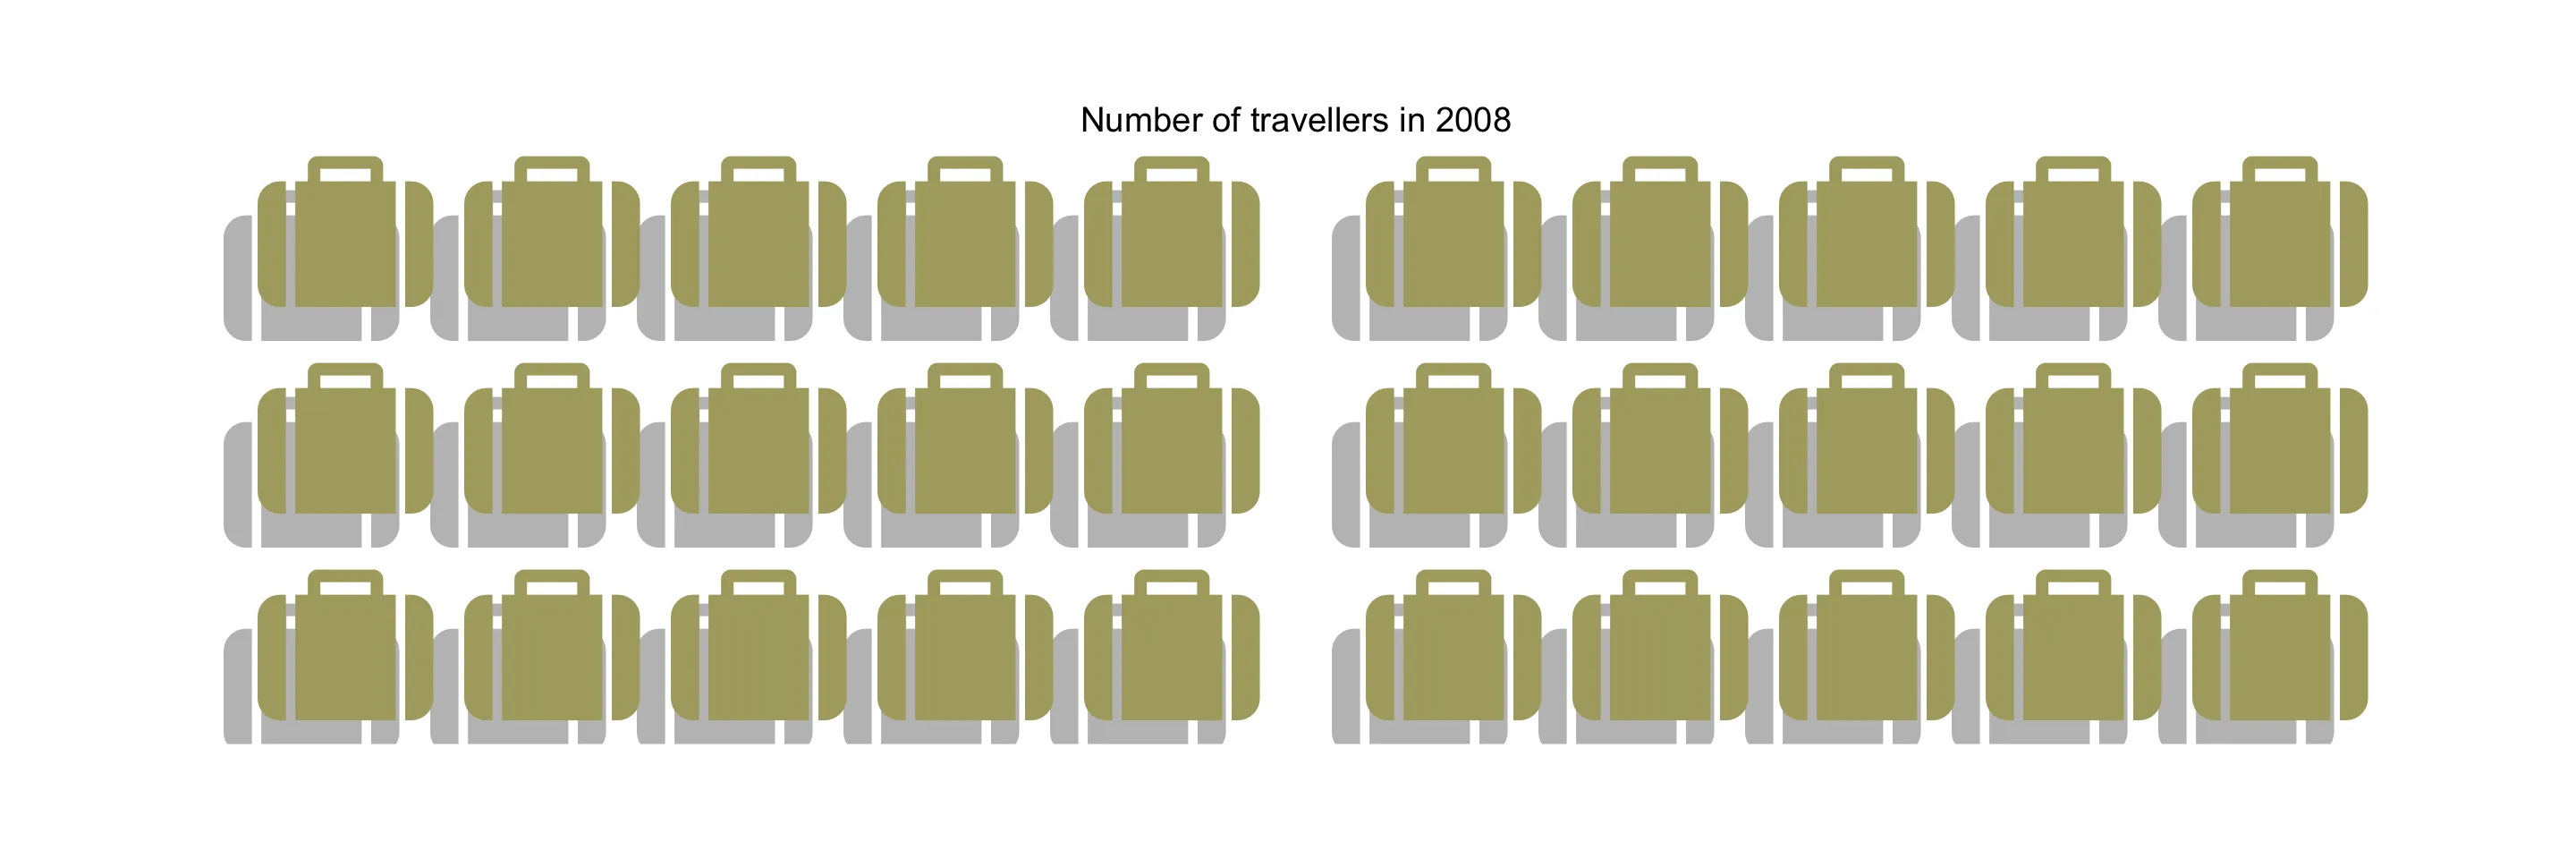 counts of travellers